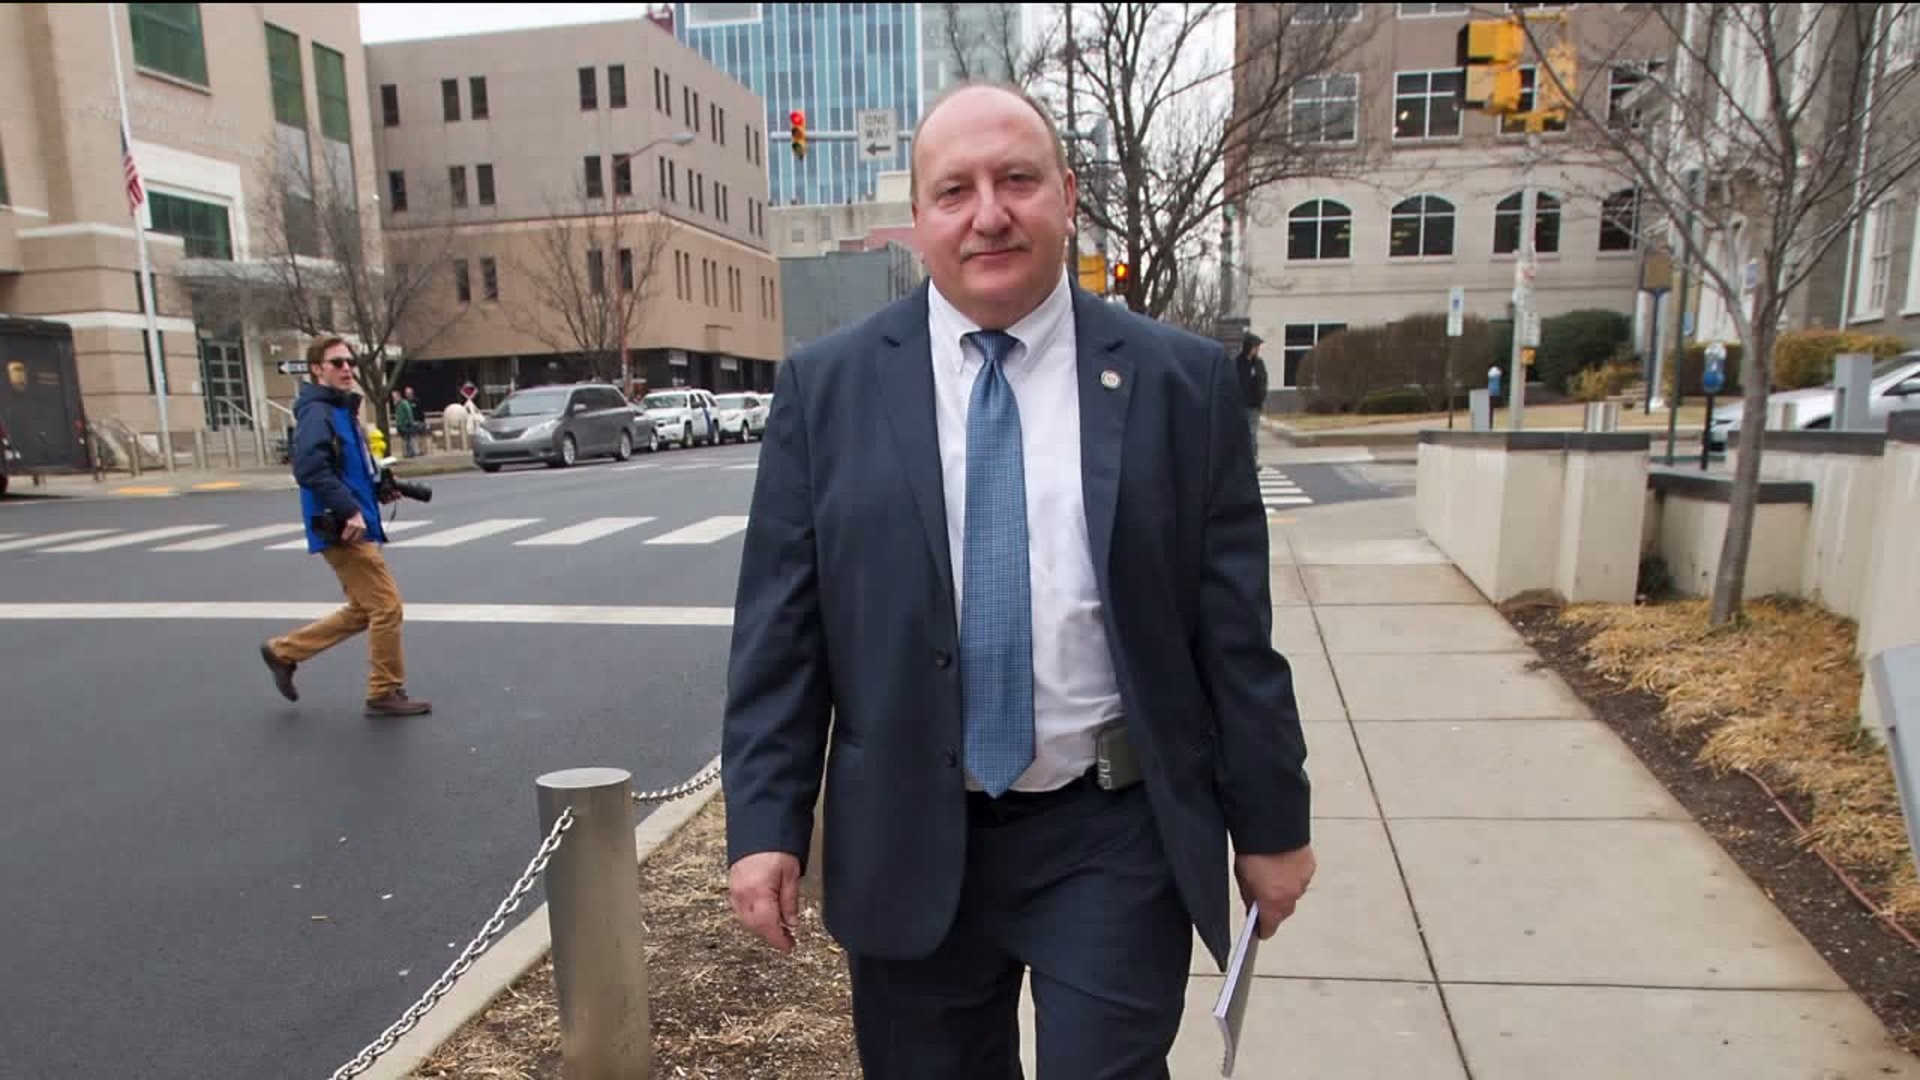 Allentown Mayor Resigning After Federal Corruption Charges Conviction